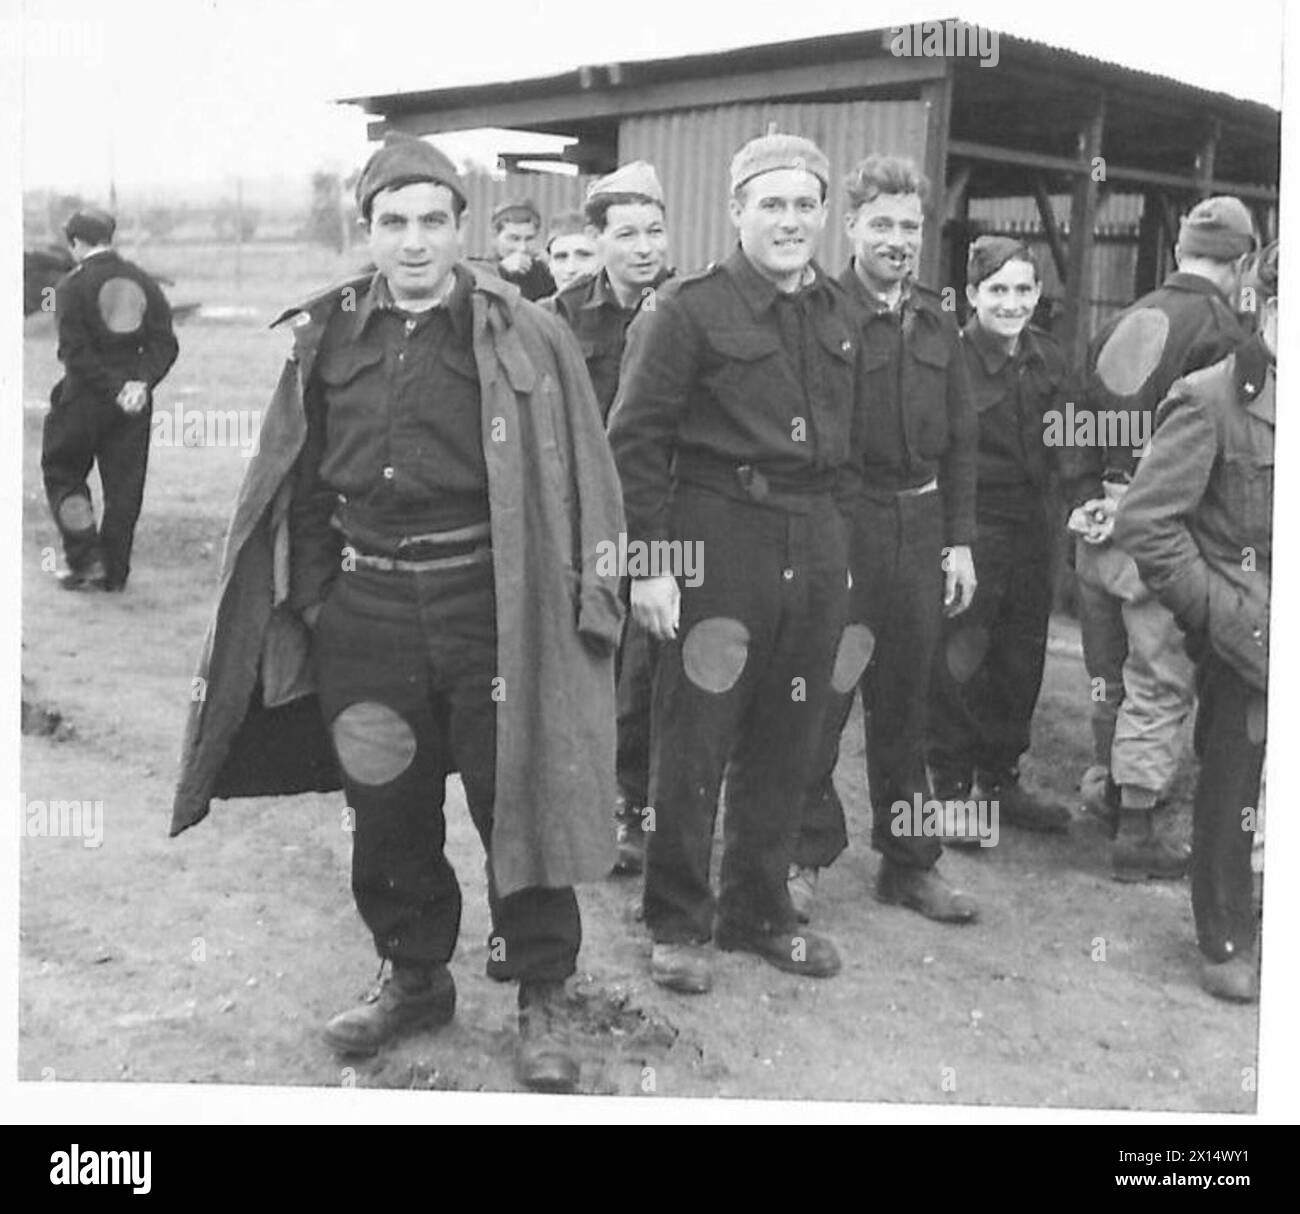 ITALIAN PRISONER OF WAR CAMP - These prisoners appear to be happy out of the war British Army Stock Photo